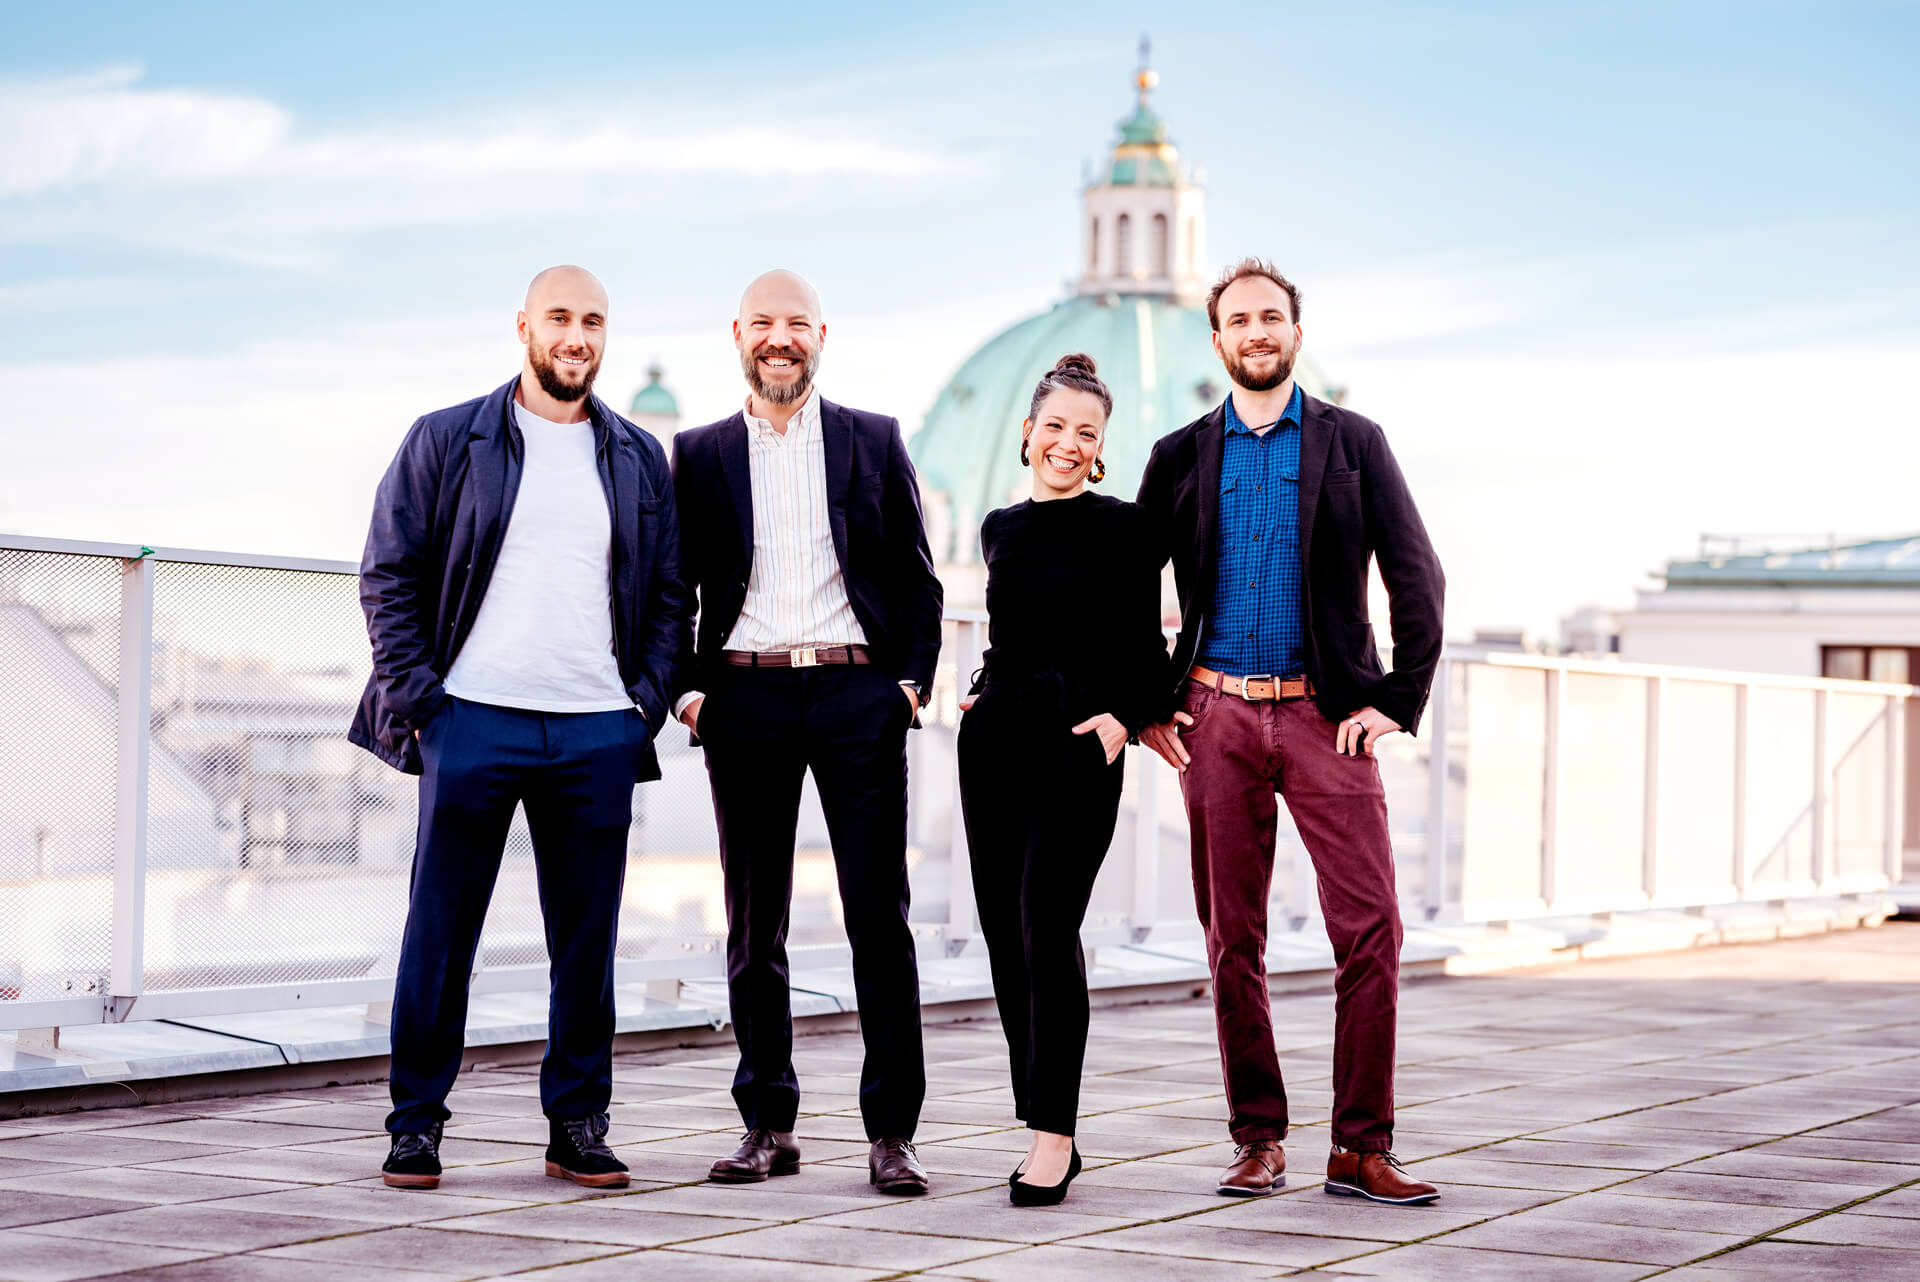 Invisible-Light Labs featured in Forbes’ list of spin-offs to watch in 2021! Invisible-Light Labs stands proudly at #20 in this year’s list of 30 spin-offs to watch in the DACH region. 